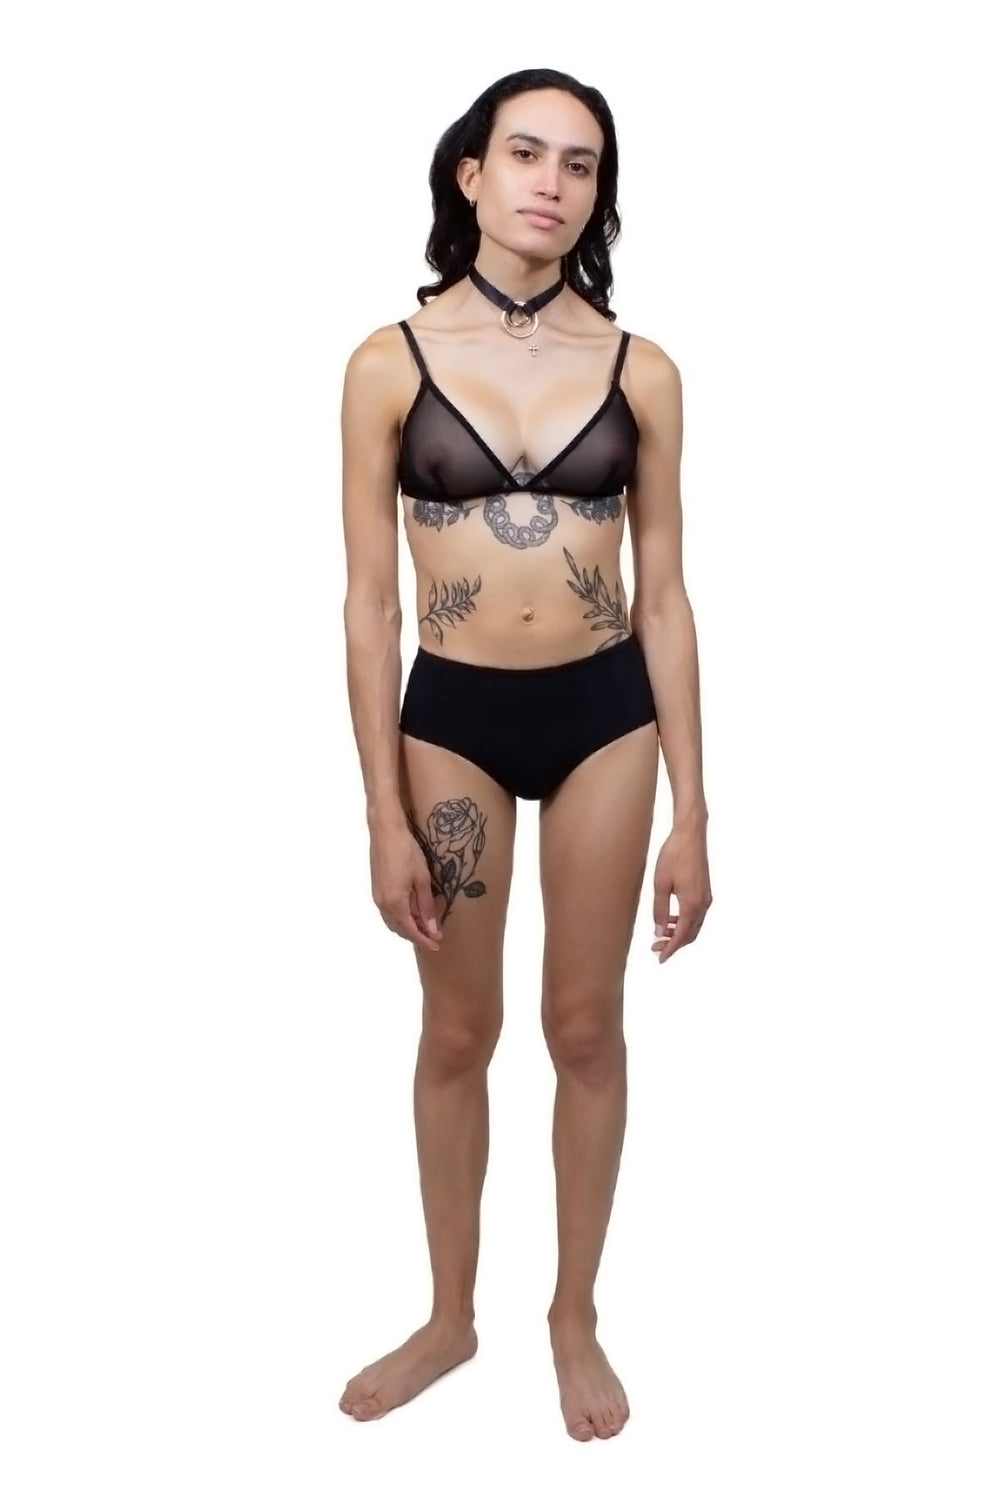 Transfemme person wearing a black tucking underwear compression gaff with a boyshort cut with a mesh bra, photographed from the front.